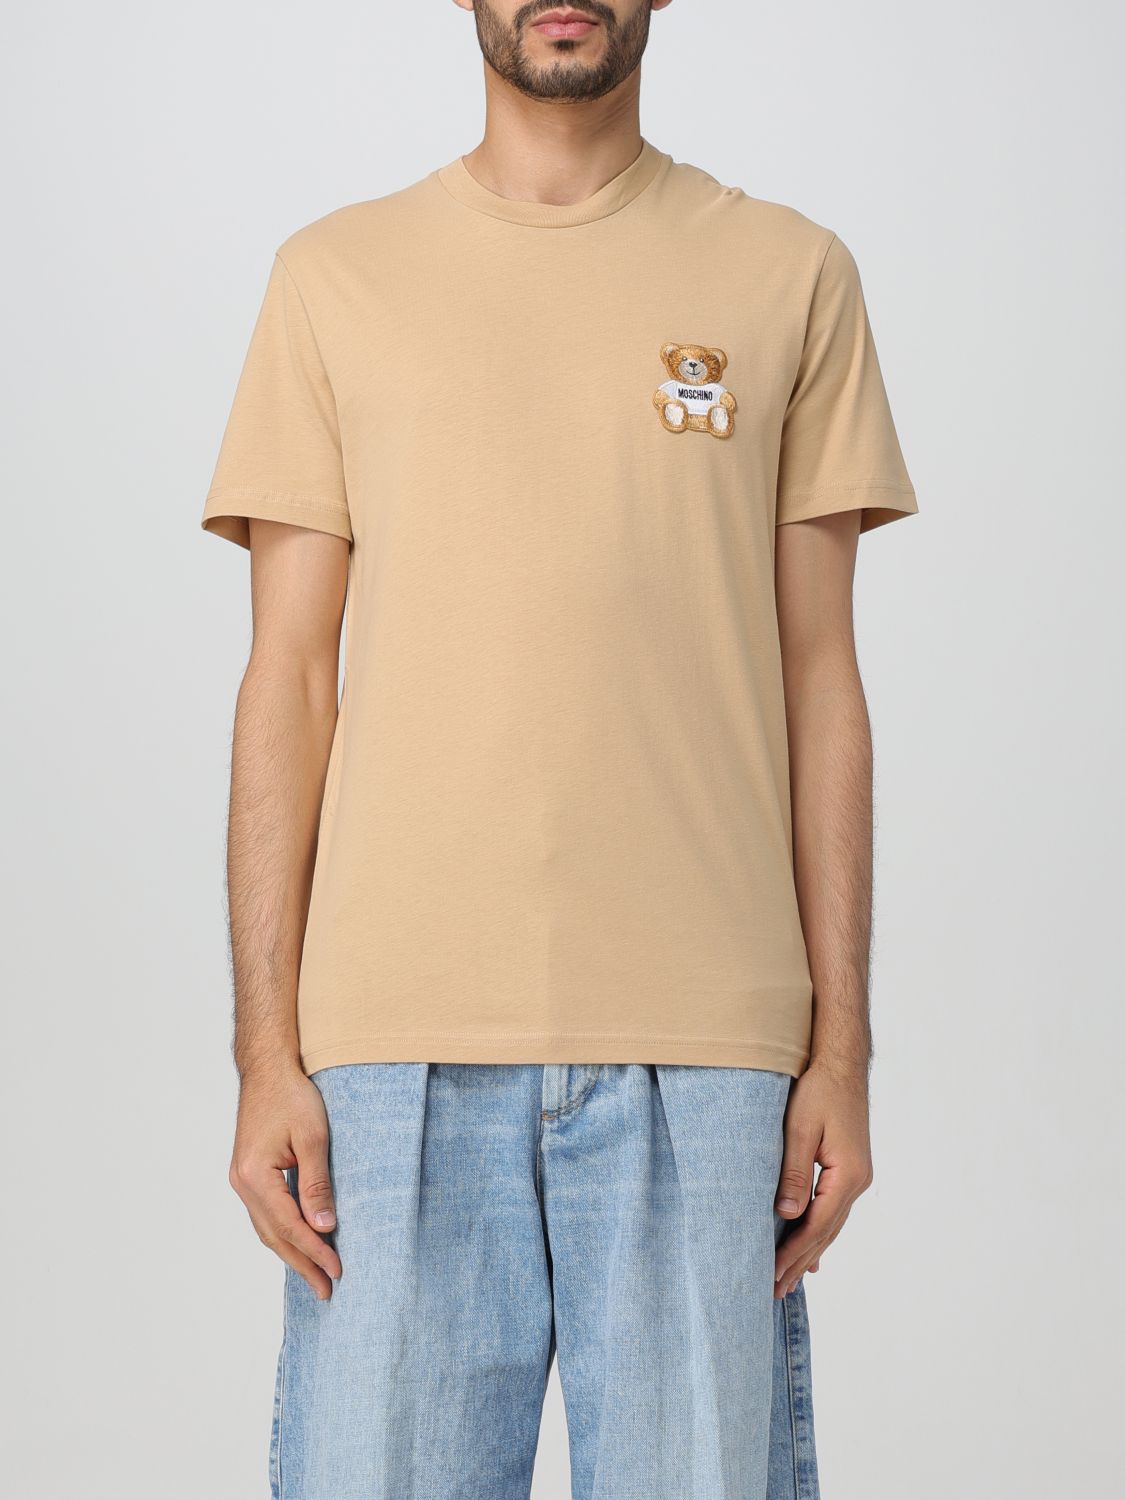 Moschino Couture T-shirt  Men Color Beige